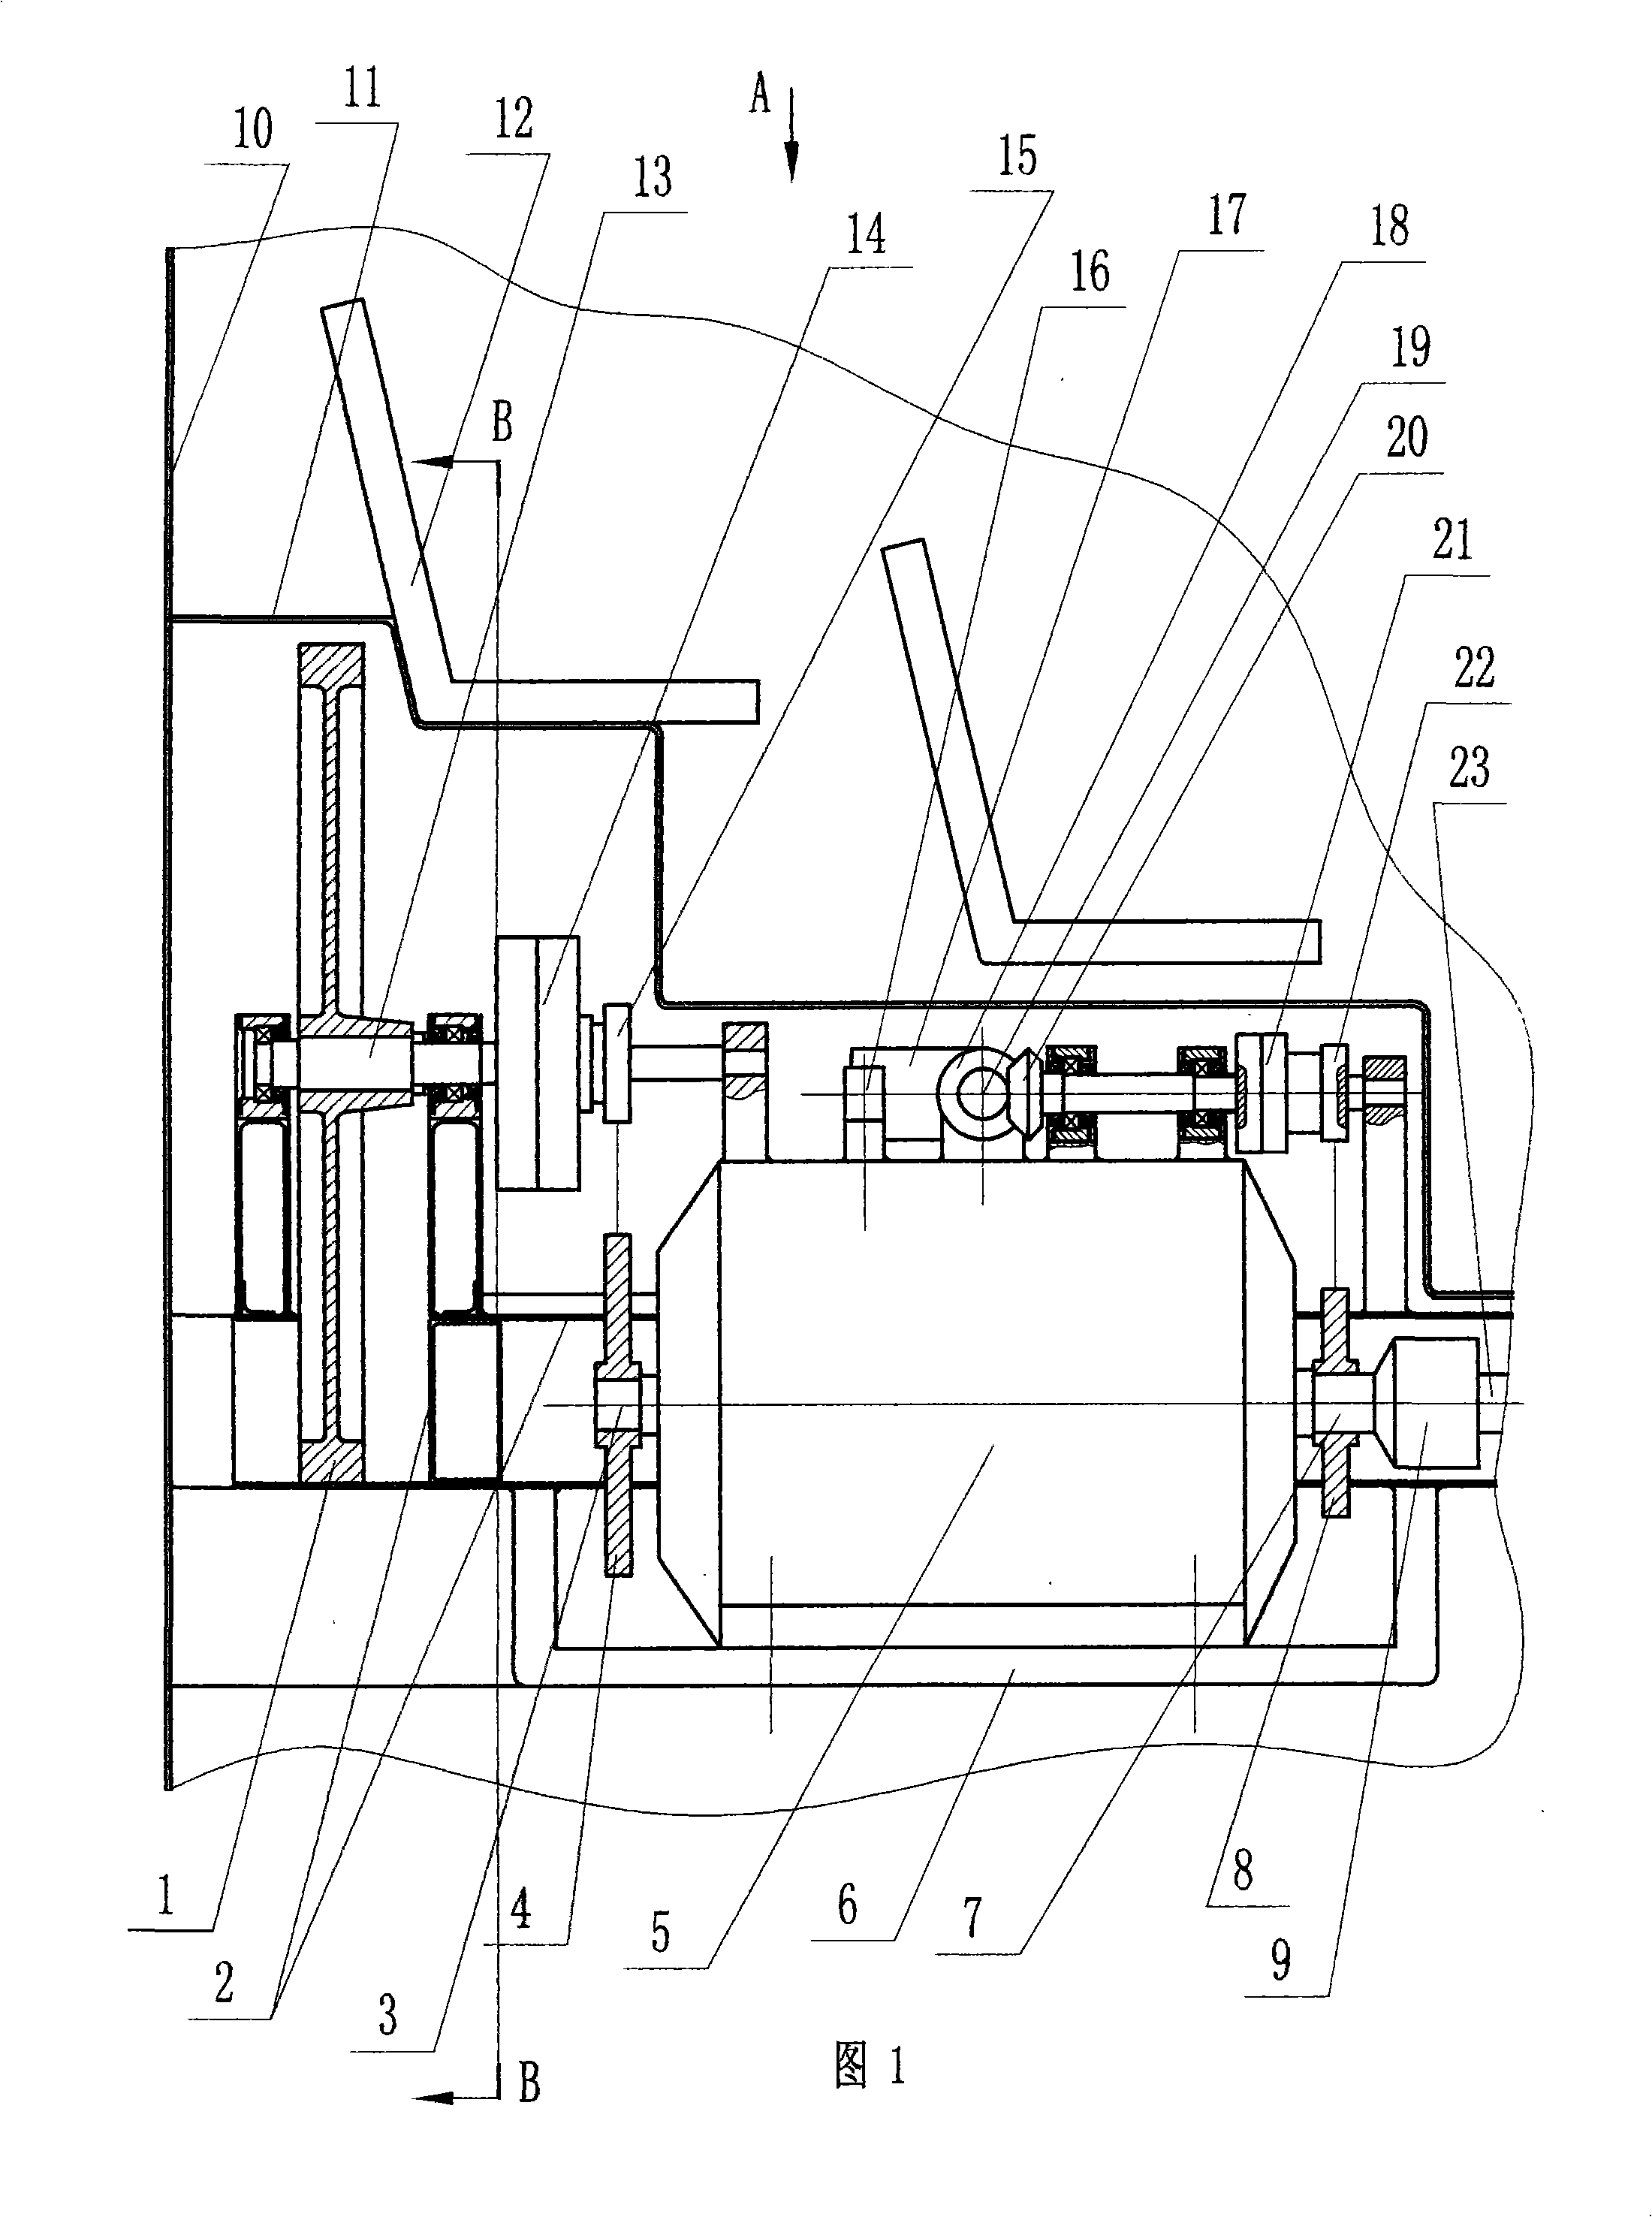 Energy-storing and releasing device for braking